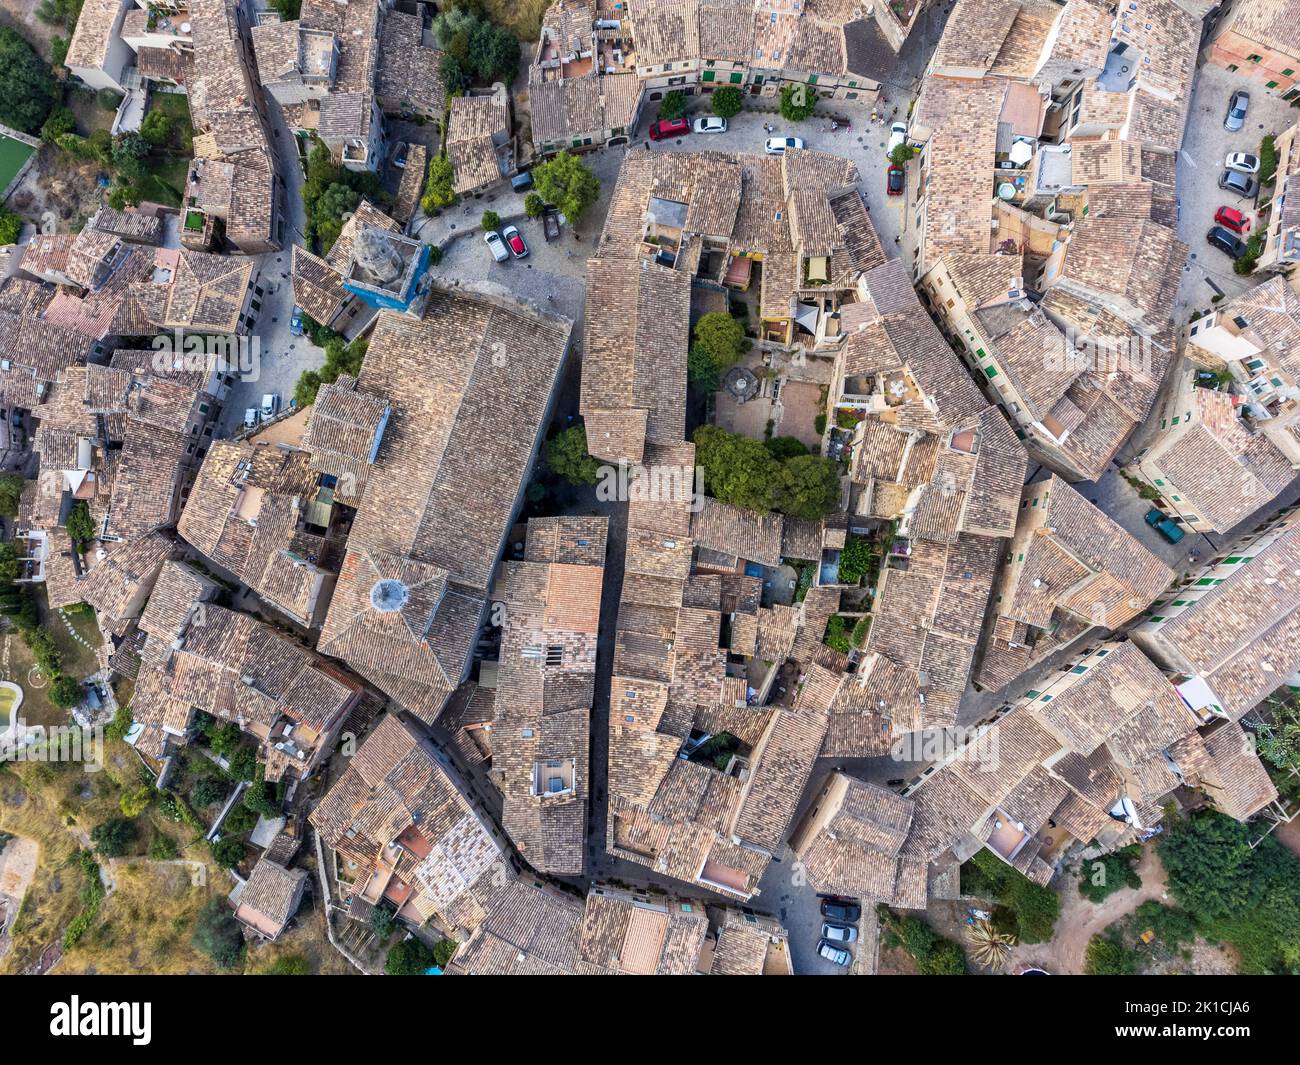 Valldemossa, view from above of the village and the roofs,  Majorca, Balearic Islands, Spain Stock Photo